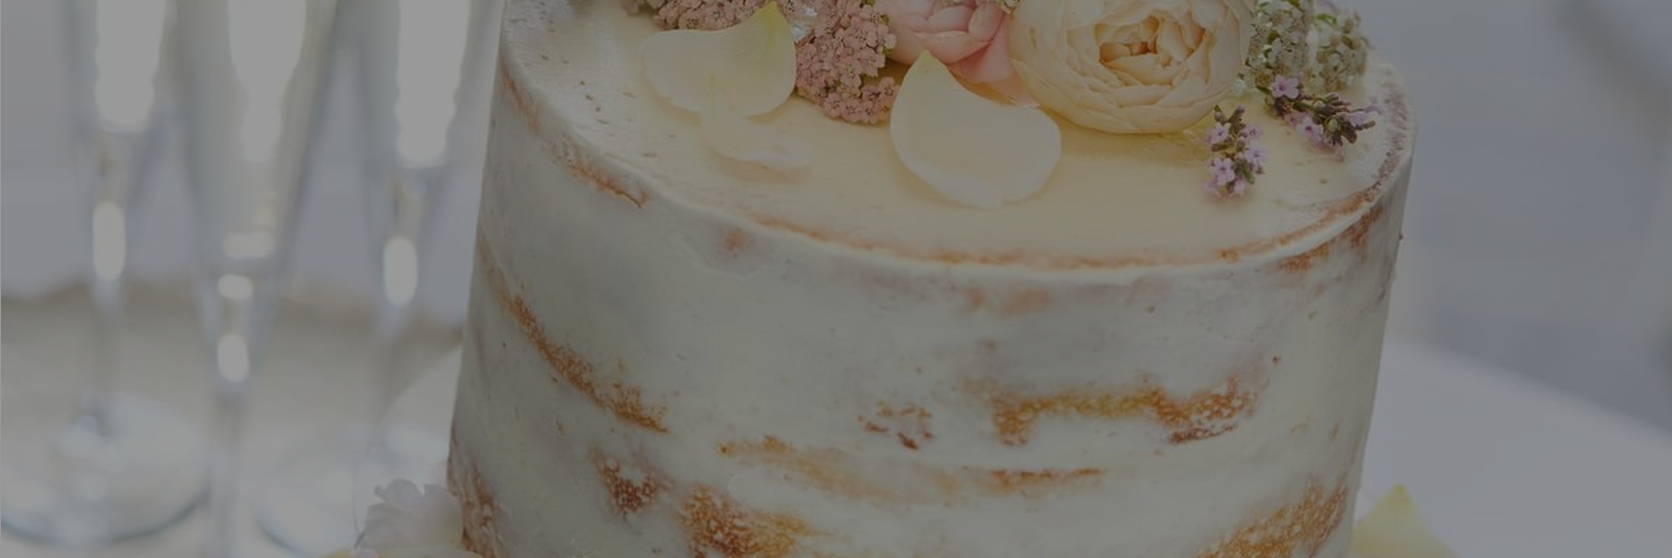 Naked-wedding-cake-decorated-with-pink-flowers